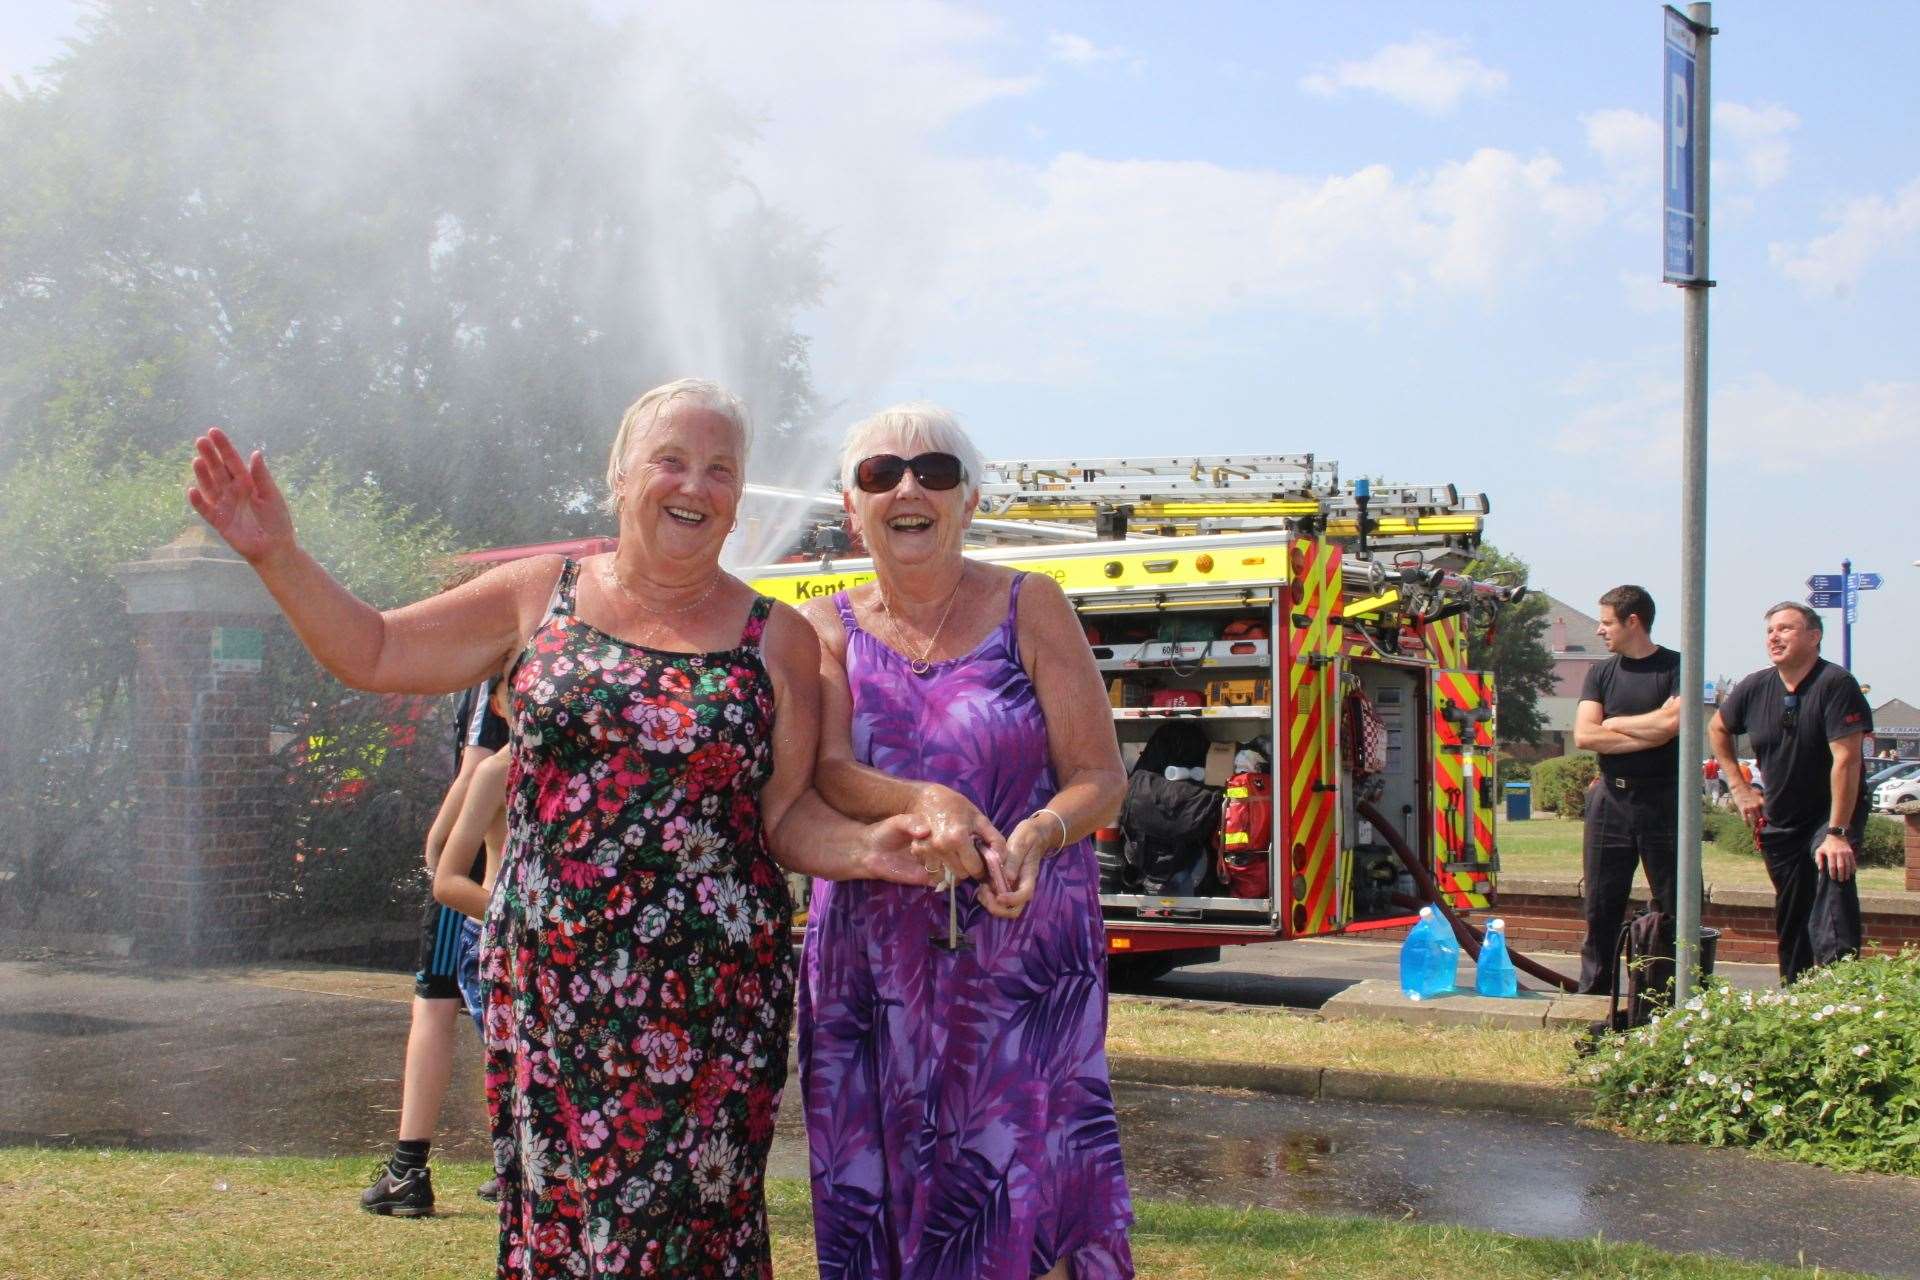 Water grannies: Sisters Margaret Firth, left, and Val Johnson, both in their 70s, cool down in a water mist provided by Kent Fire and Rescue Services at Beachfields Park, Sheerness, on the Isle of Sheppey. Picture: John Nurden (14293466)